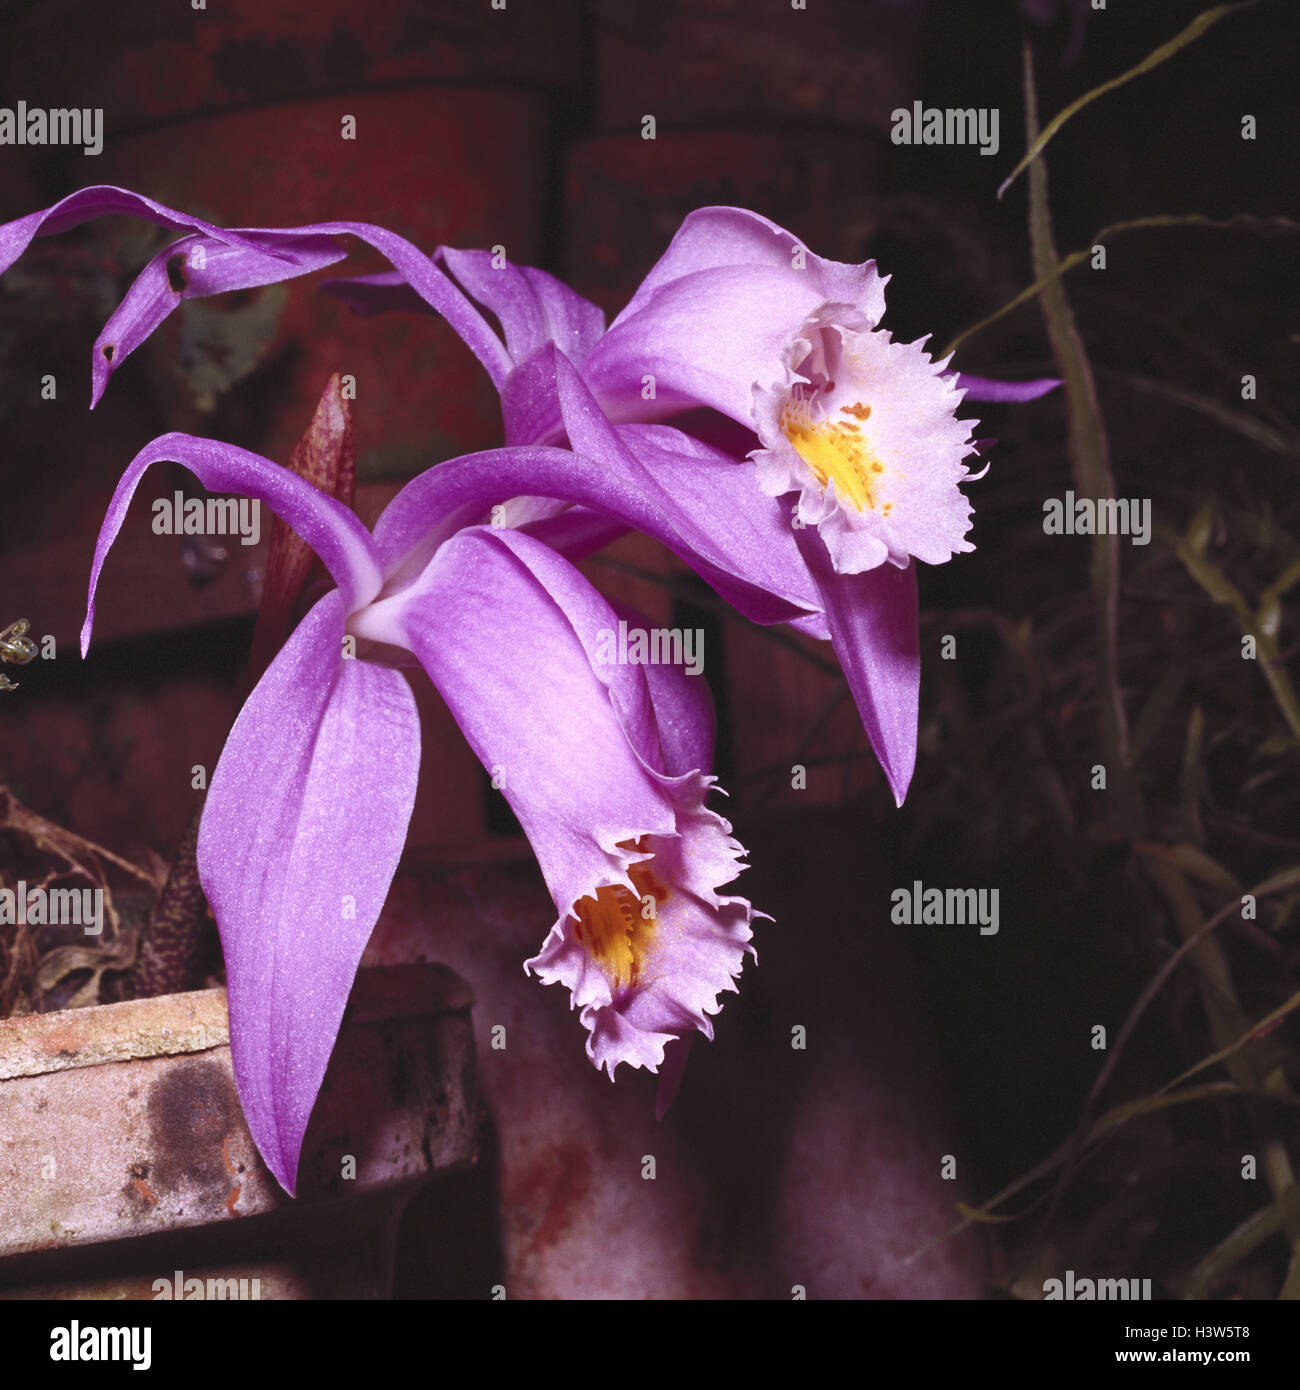 Orchid, Pleione praecox, blossom, pink, close up, nature, botany, flora, plants, flowers, orchids, tropical orchids, exotic plants, Pleione, Orchidacea, orchid genus, orchid plants, blossoms, two, blossom, orchid blossom, Stock Photo